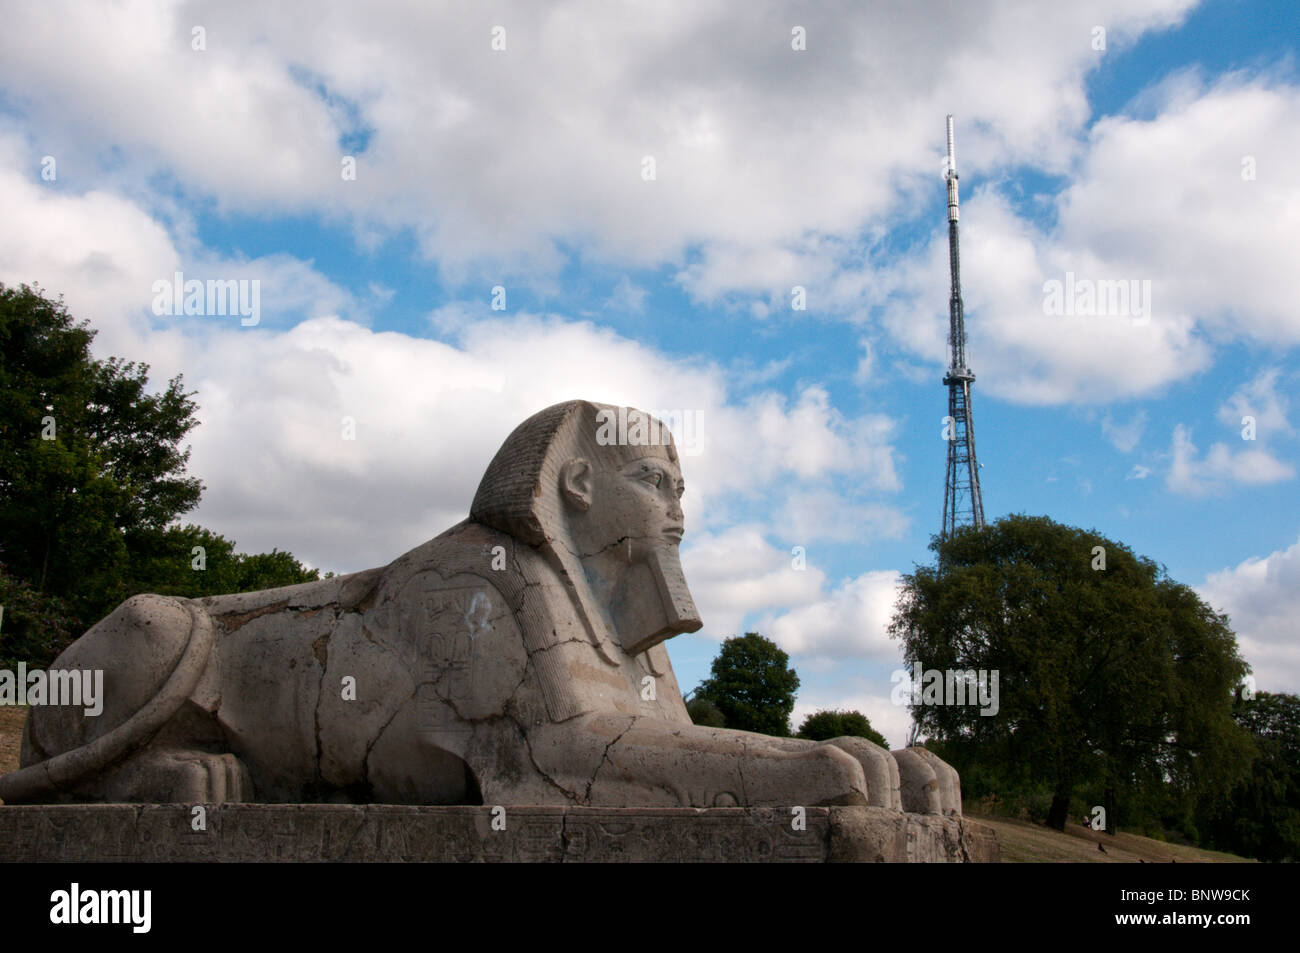 A Sphinx - part of the ruins of the Crystal Palace in South London with the TV mast in the background. Stock Photo